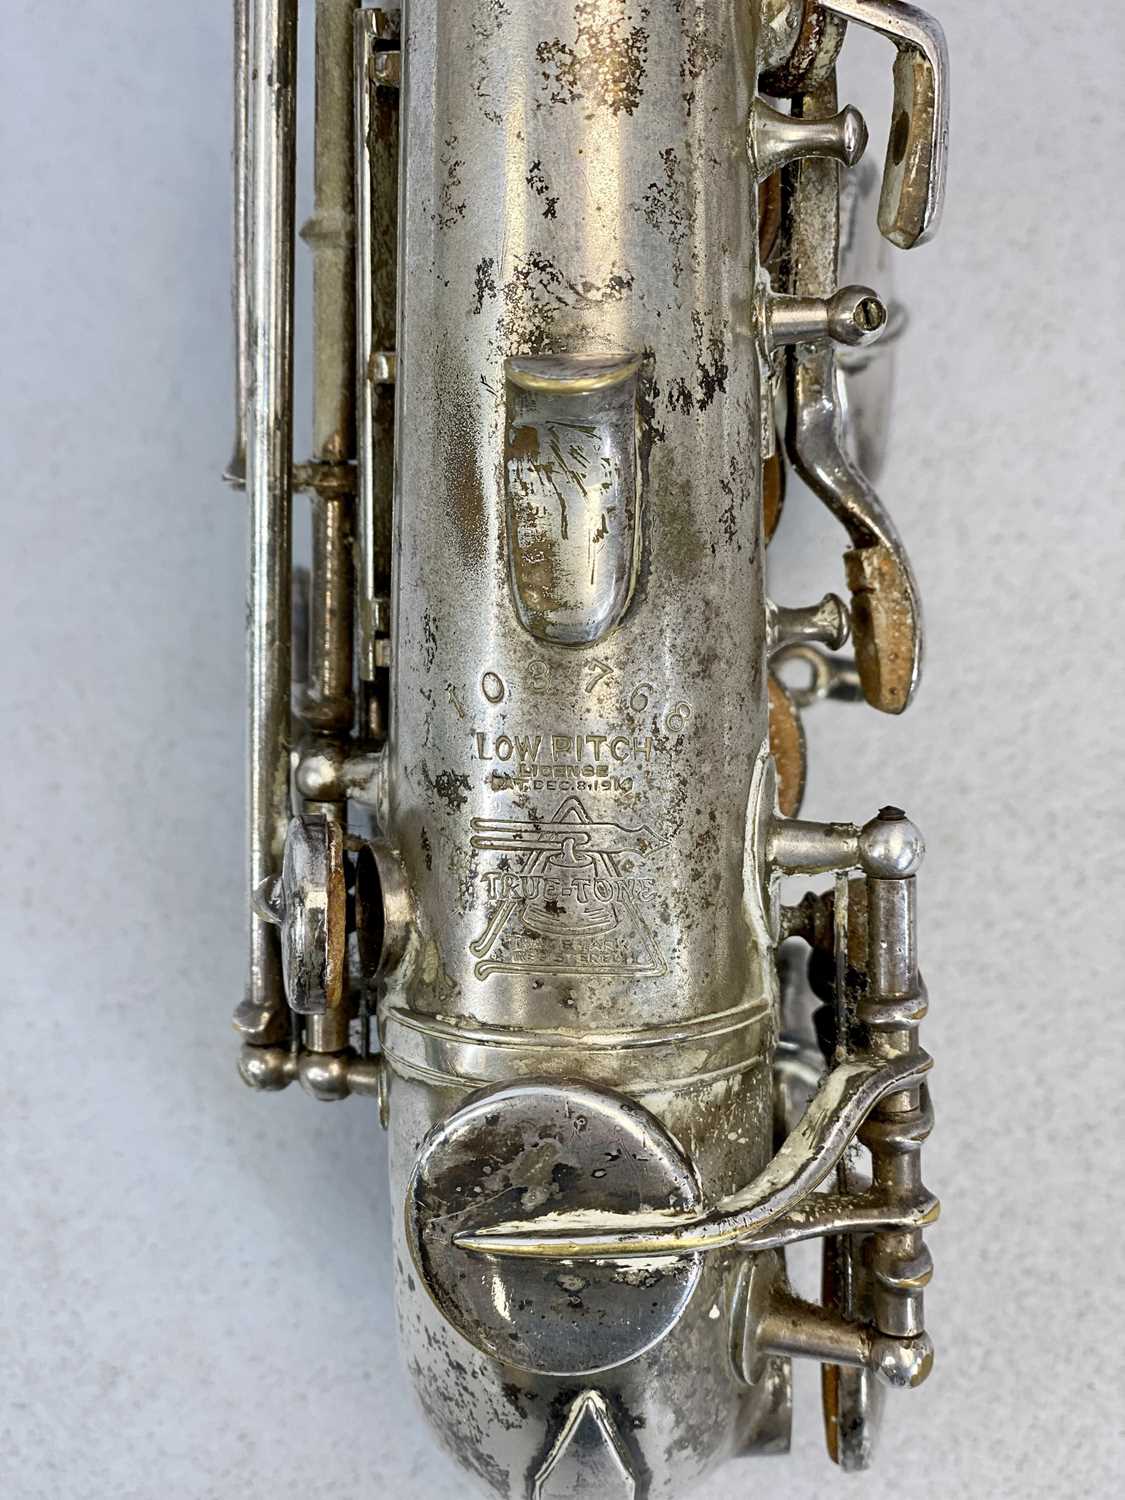 BUESCHER SILVER PLATED CURVED SOPRANO LOW PITCH SAXOPHONE, SERIAL NO. 103768, with case - Image 3 of 5